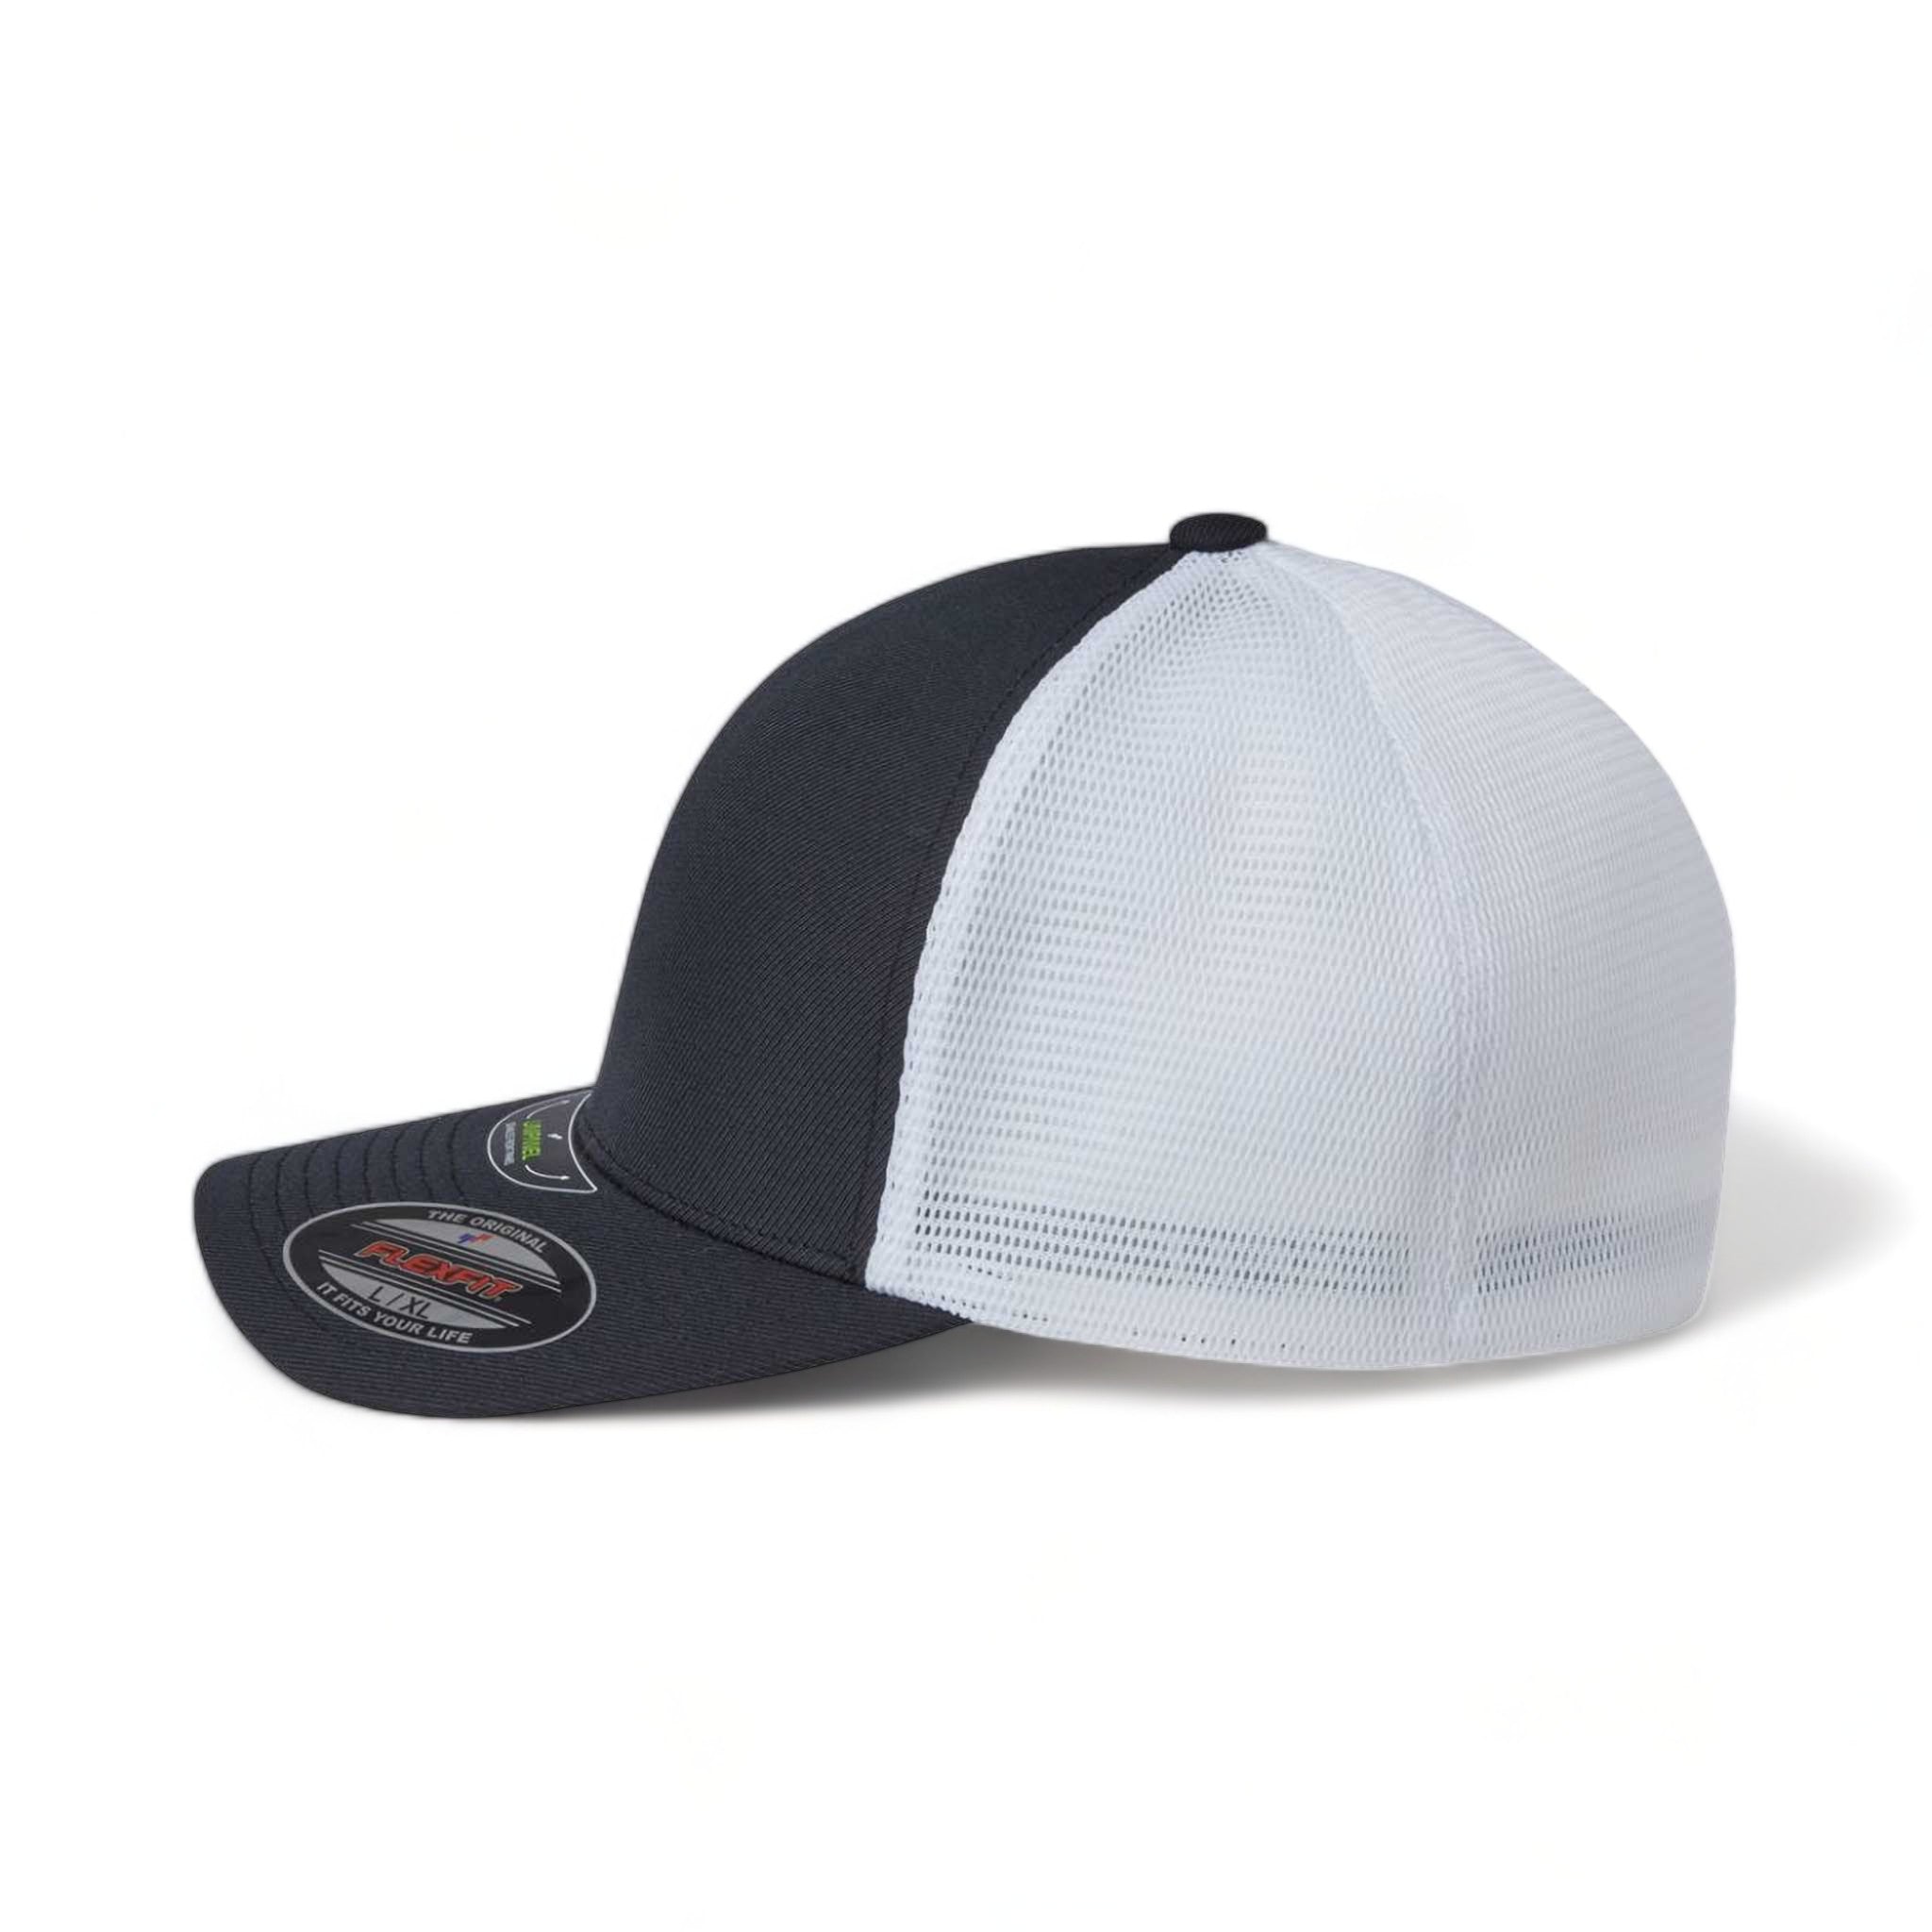 Side view of Flexfit 5511UP custom hat in black and white